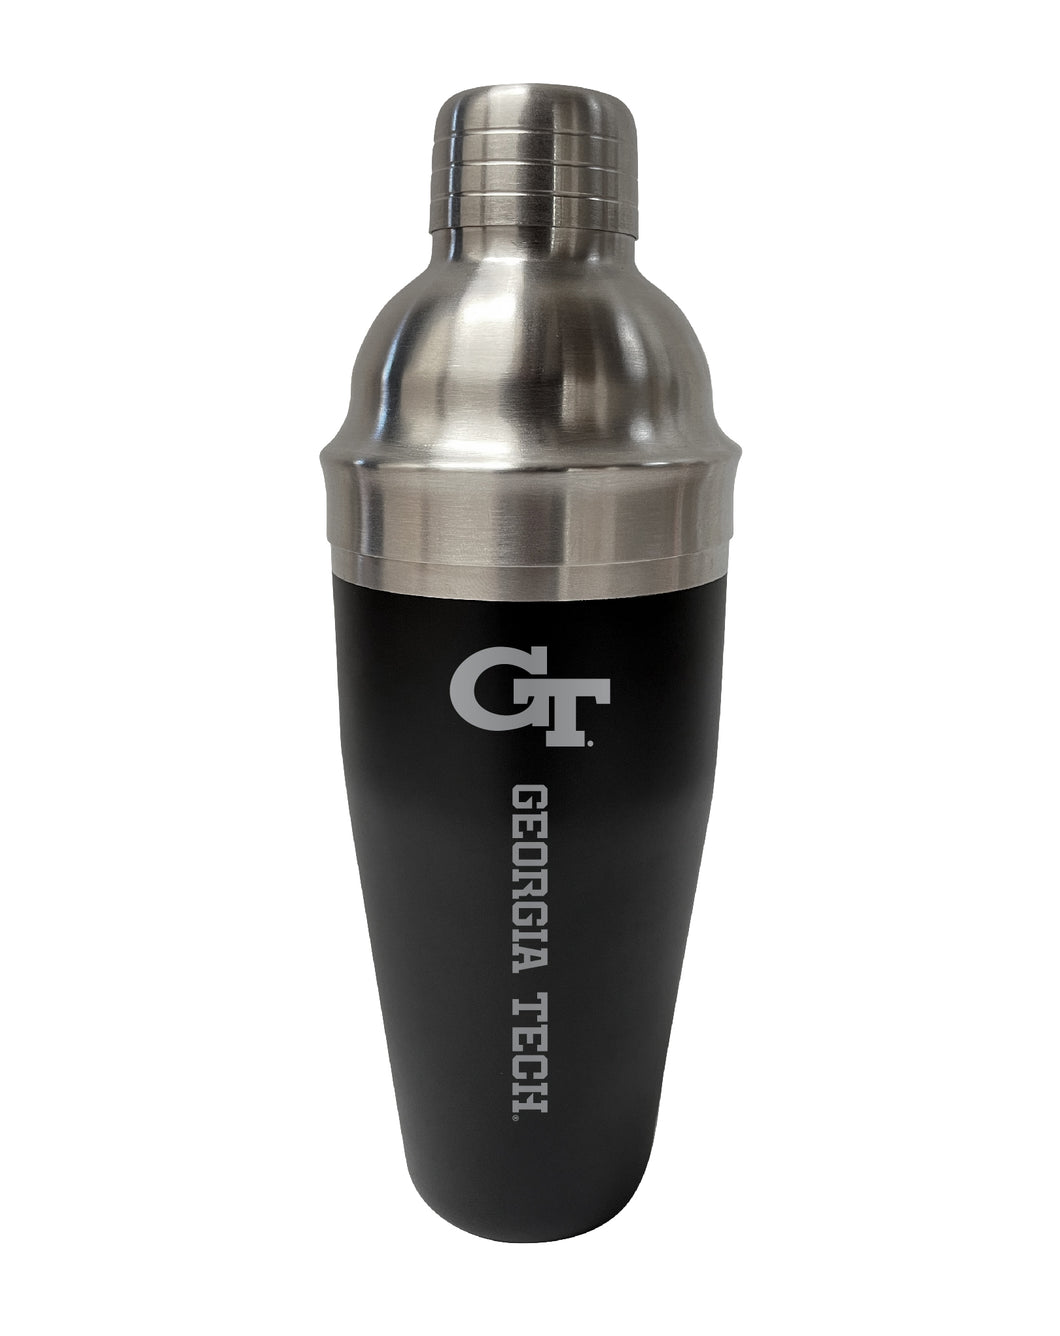 Georgia Tech Yellow Jackets NCAA Official 24 oz Engraved Stainless Steel Cocktail Shaker | College Team Spirit Drink Mixer